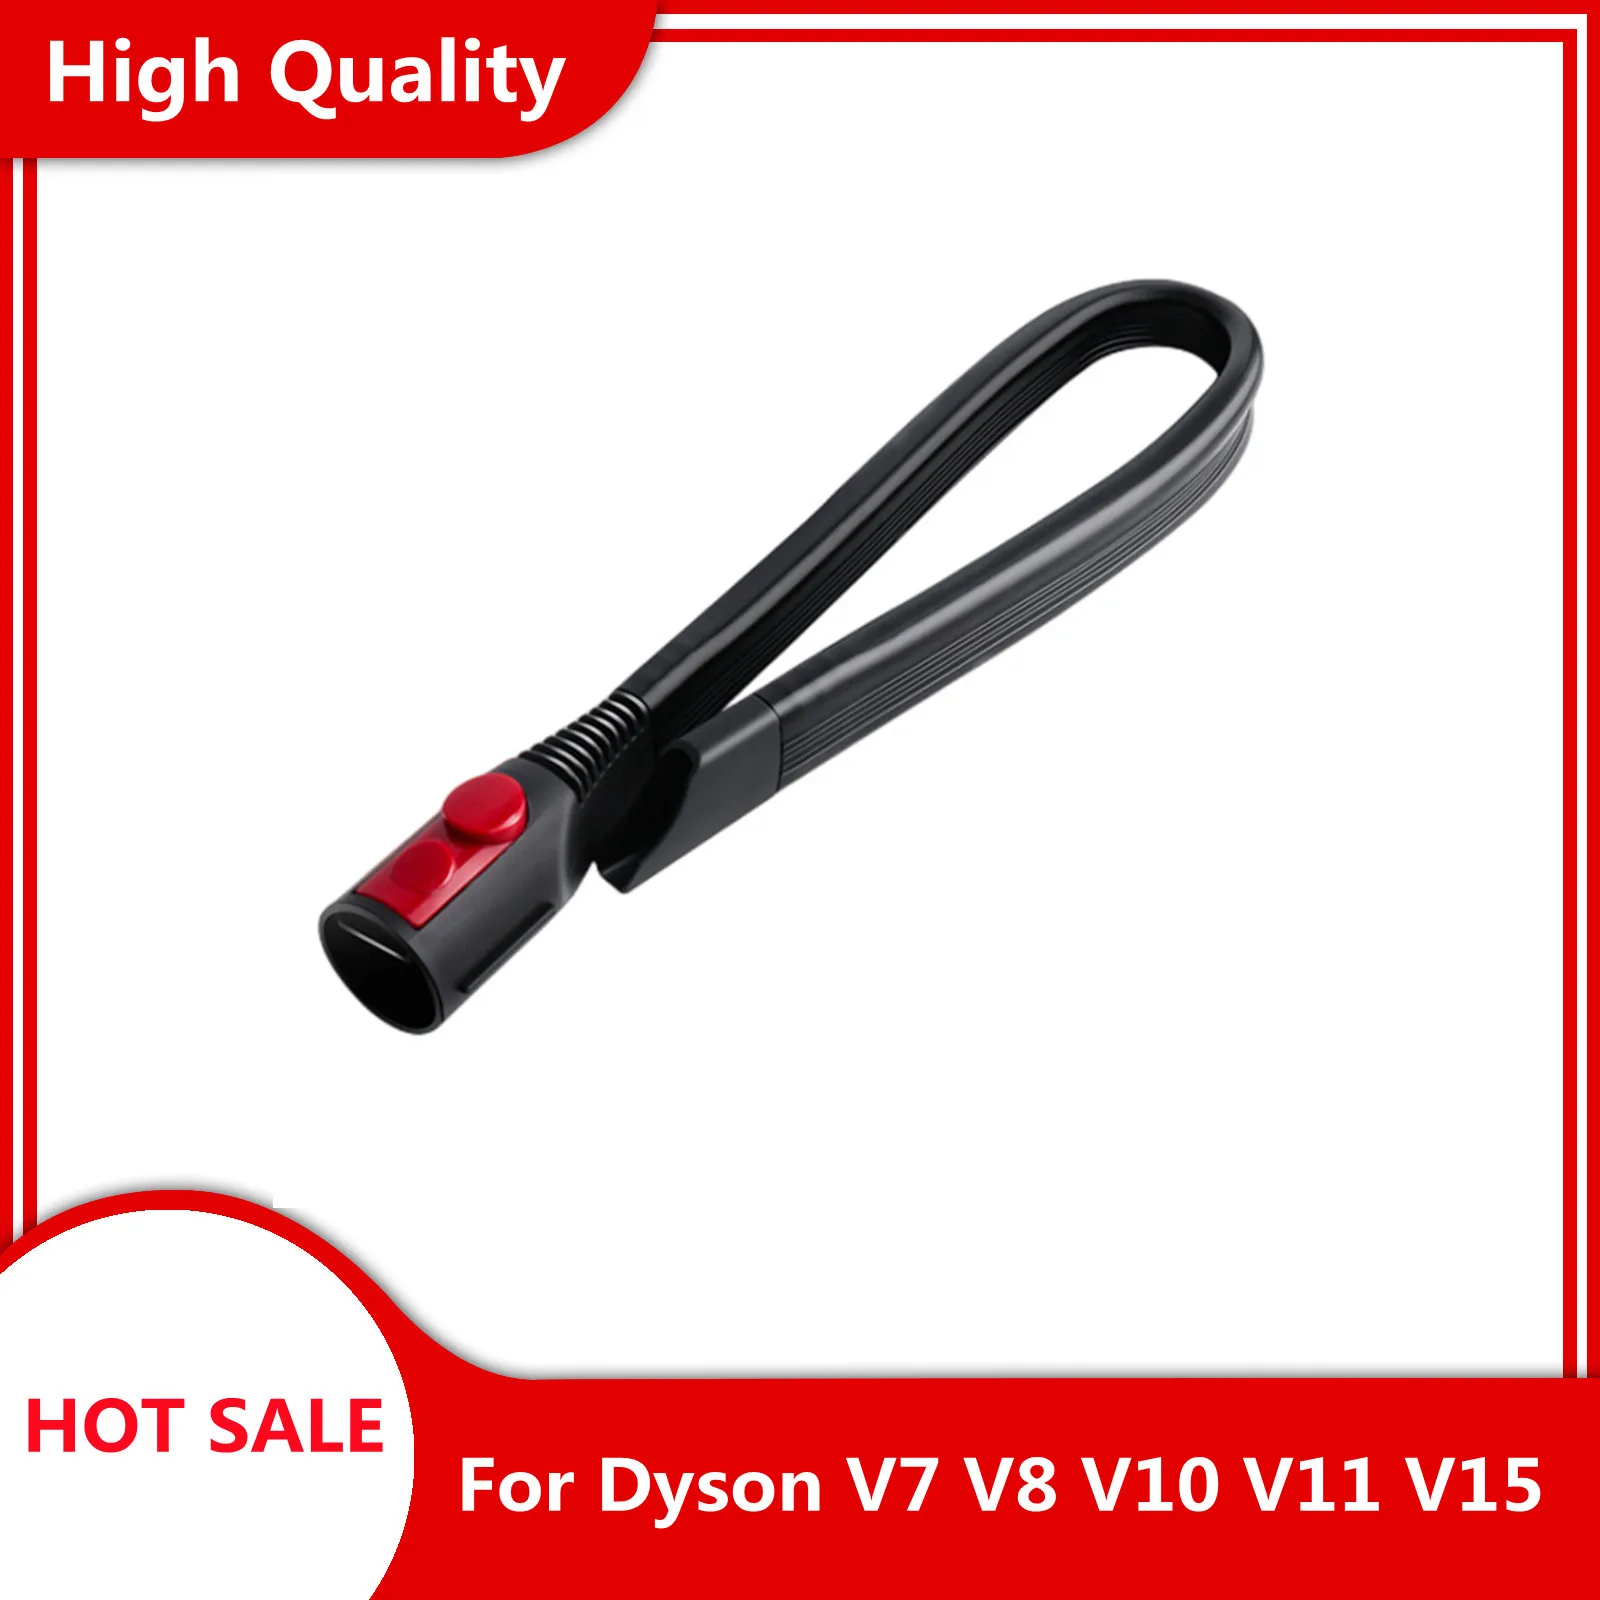 

Suitable for Corners and Gaps Cleaning Flexible Crevice Tool for Dyson Cordless Vacuum Cleaners V7 V8 V10 V11 V15